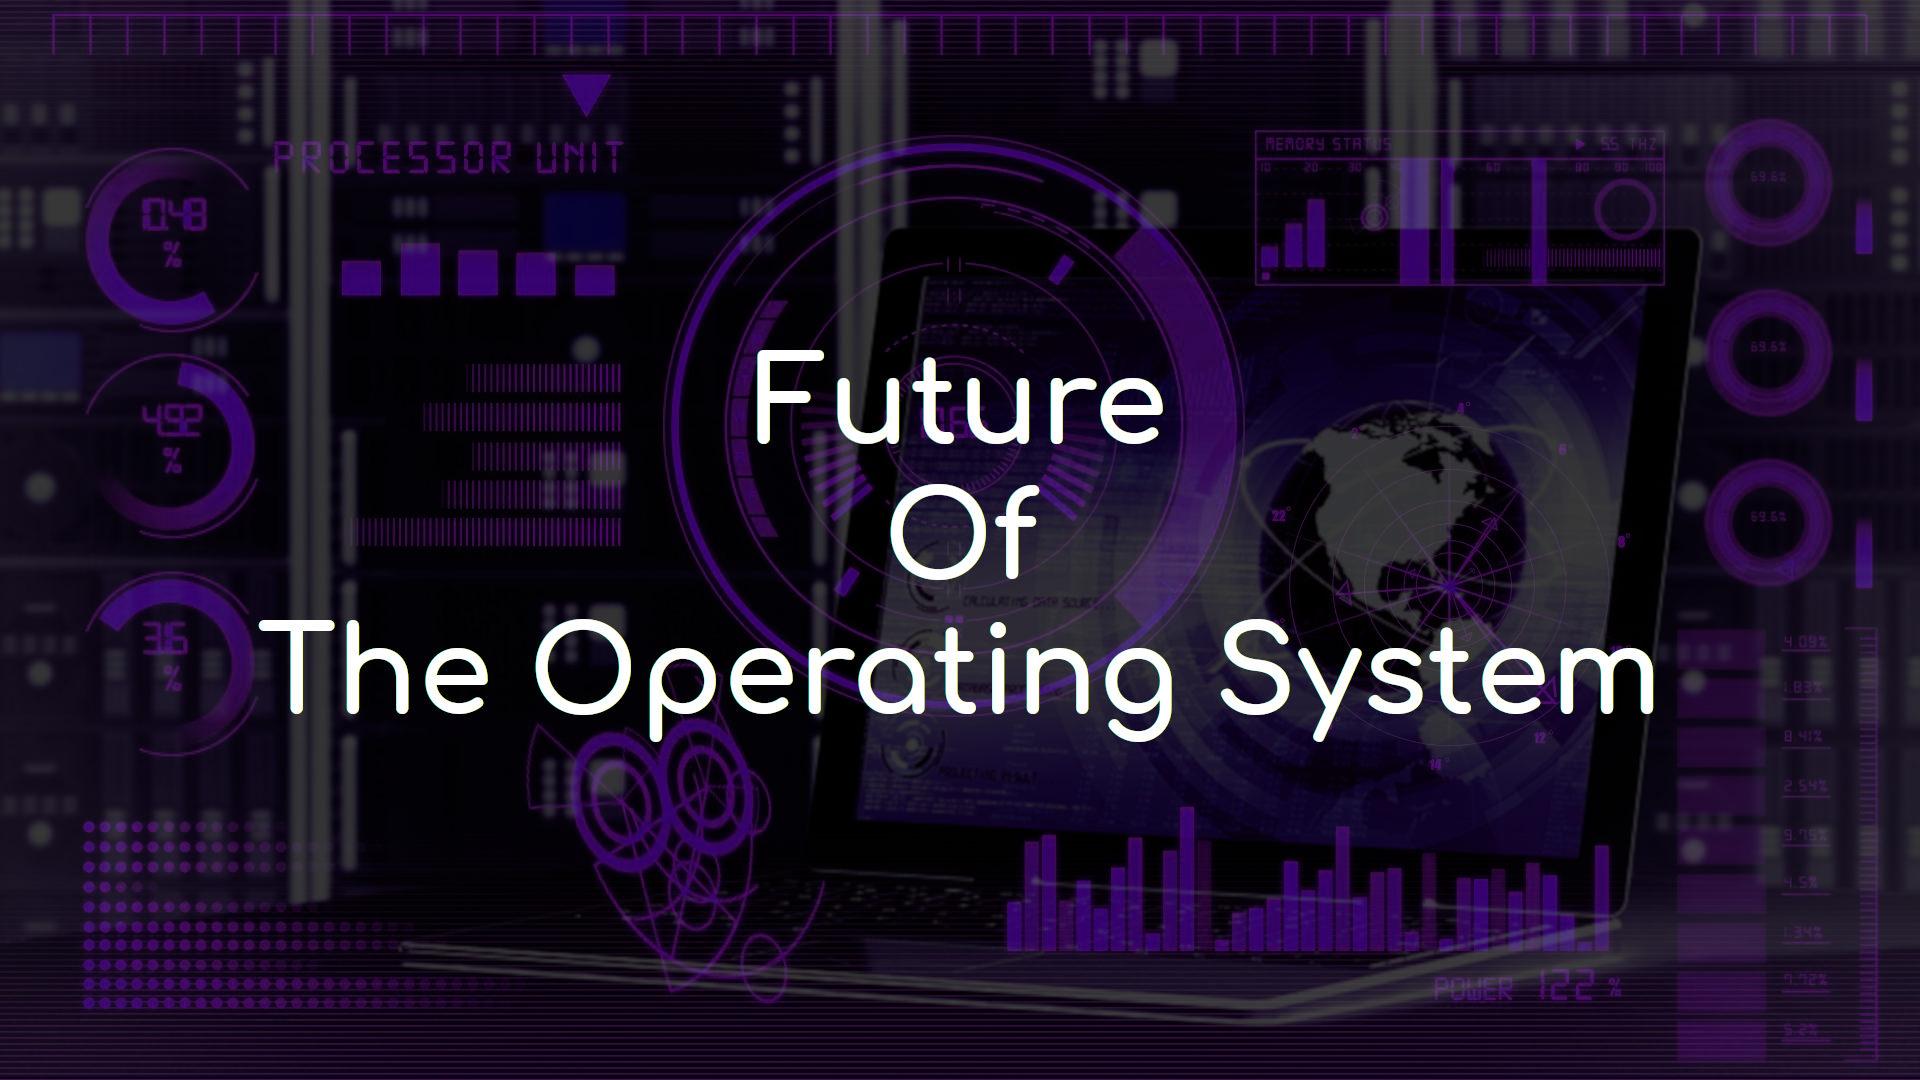 Google, Apple, Microsoft - who will rule the future operating system market?